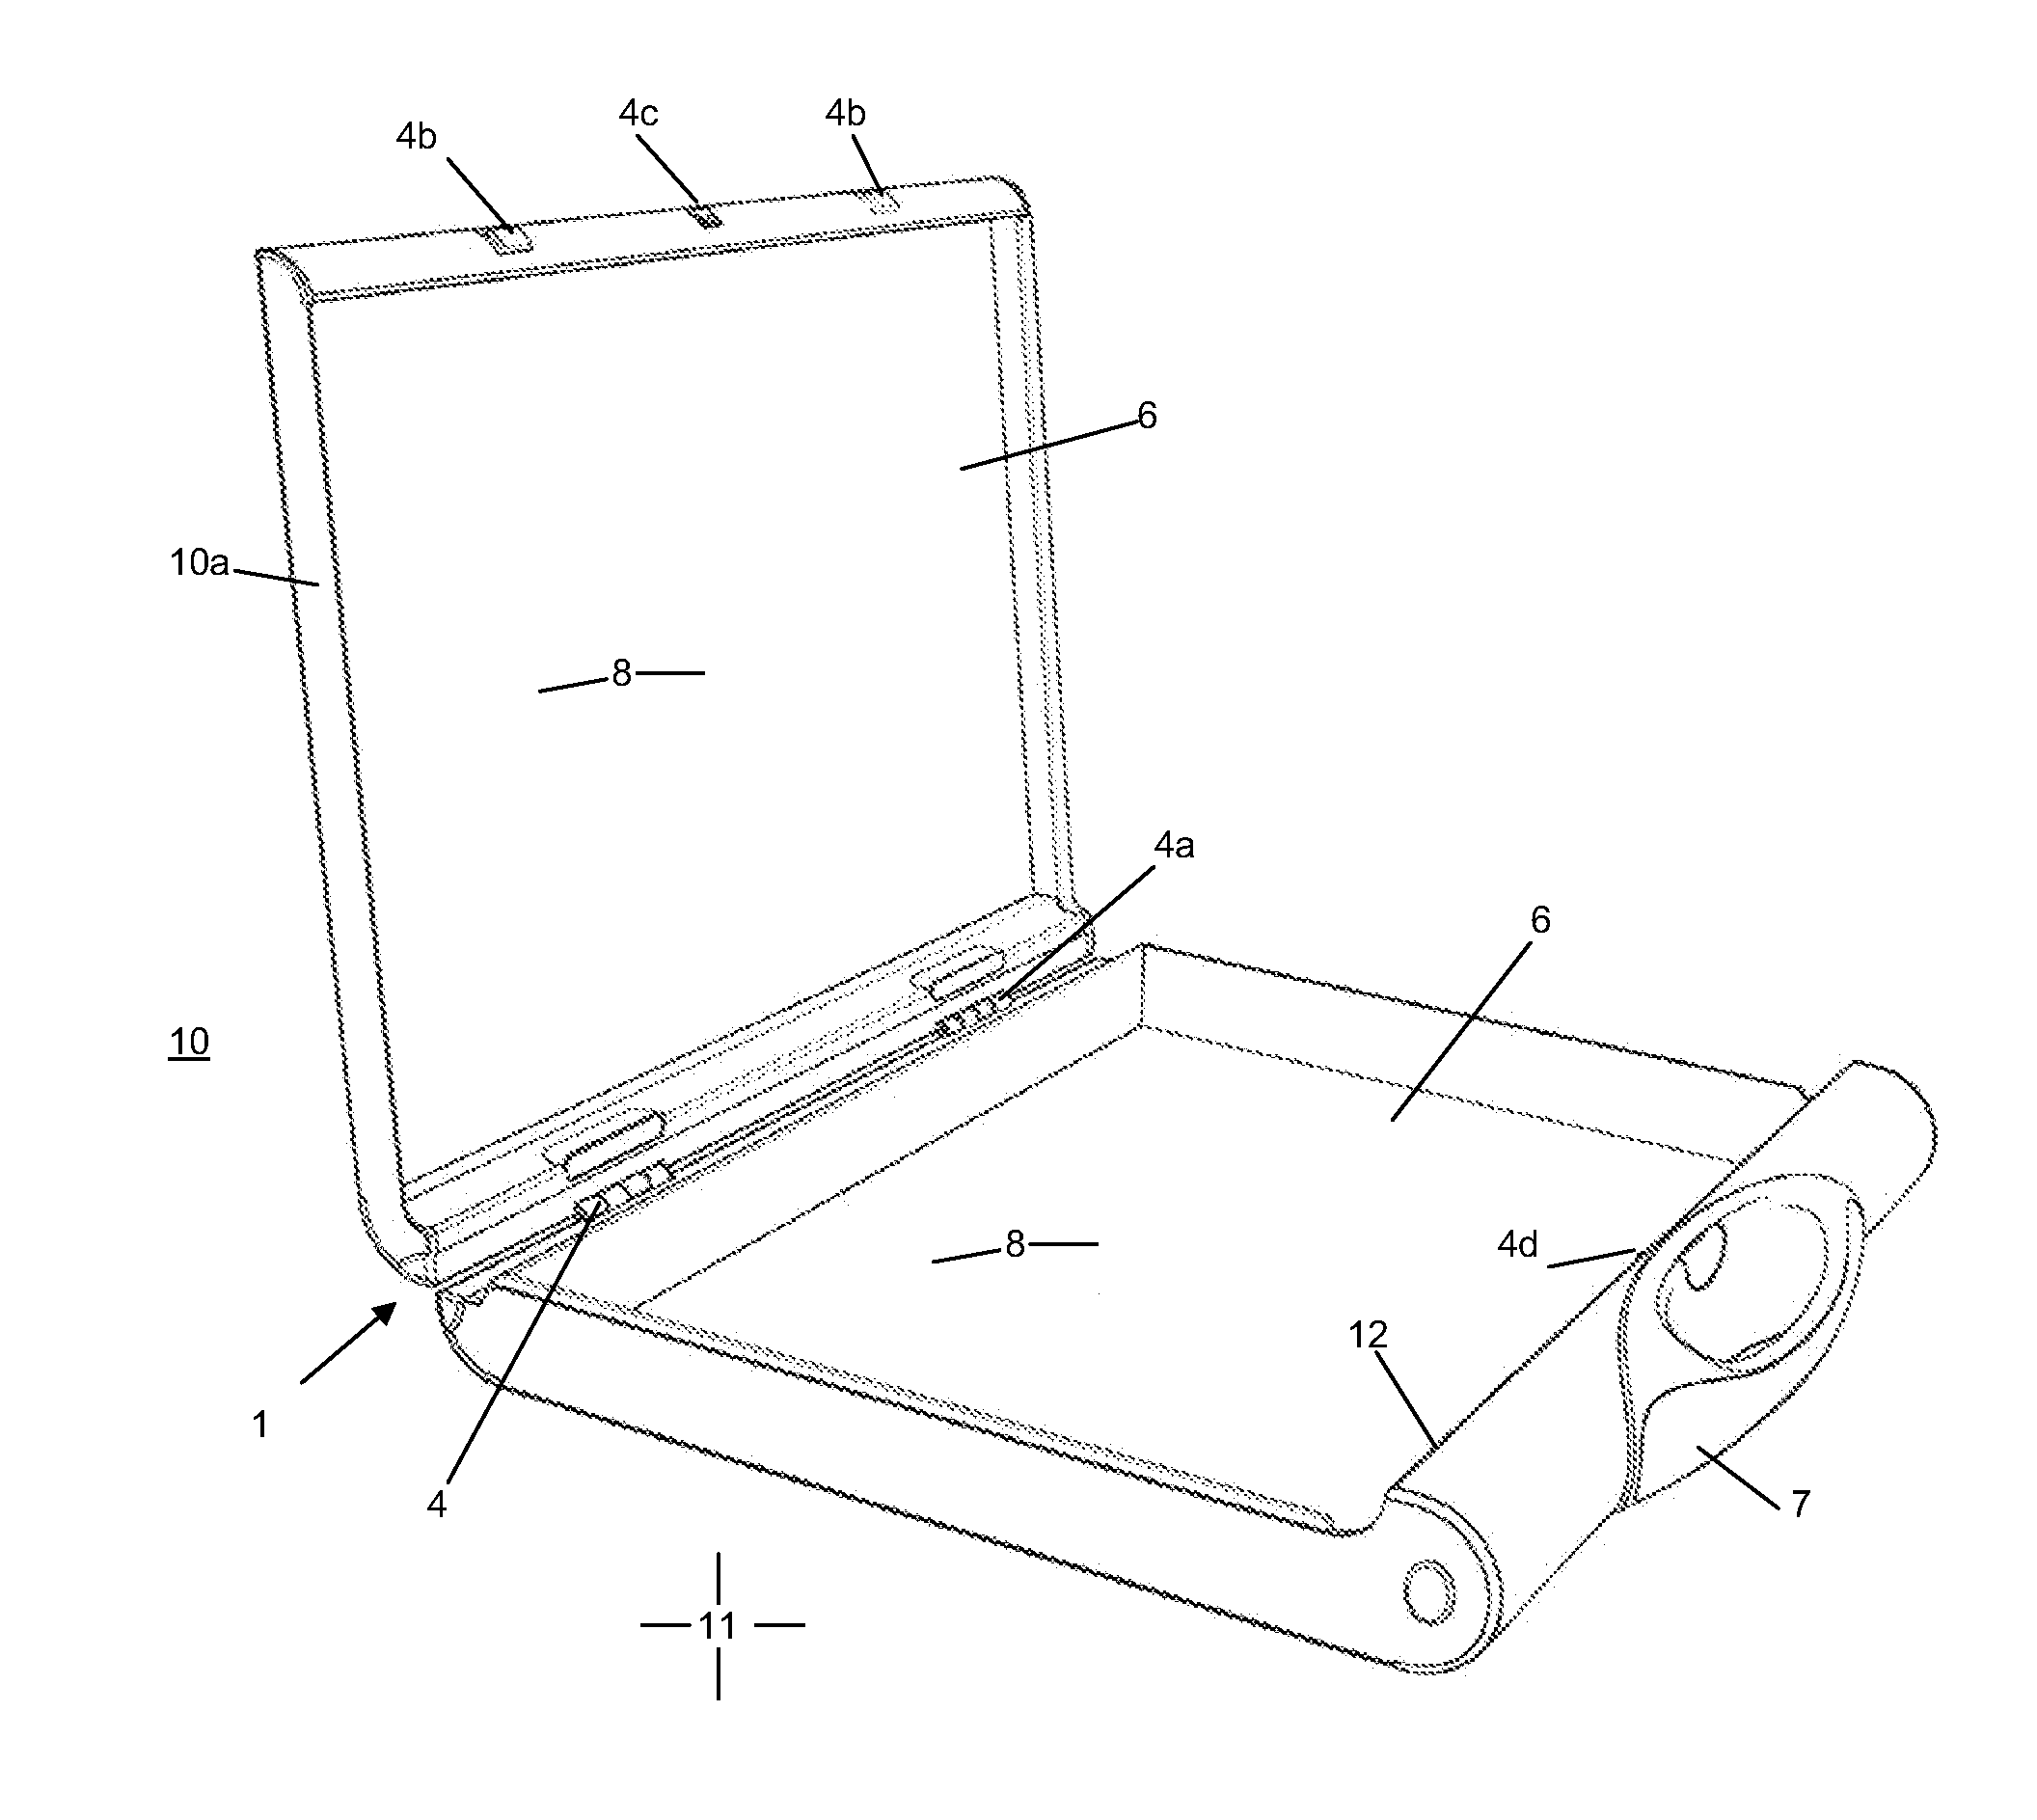 Presentation case for transporting, storing and displaying presentation material